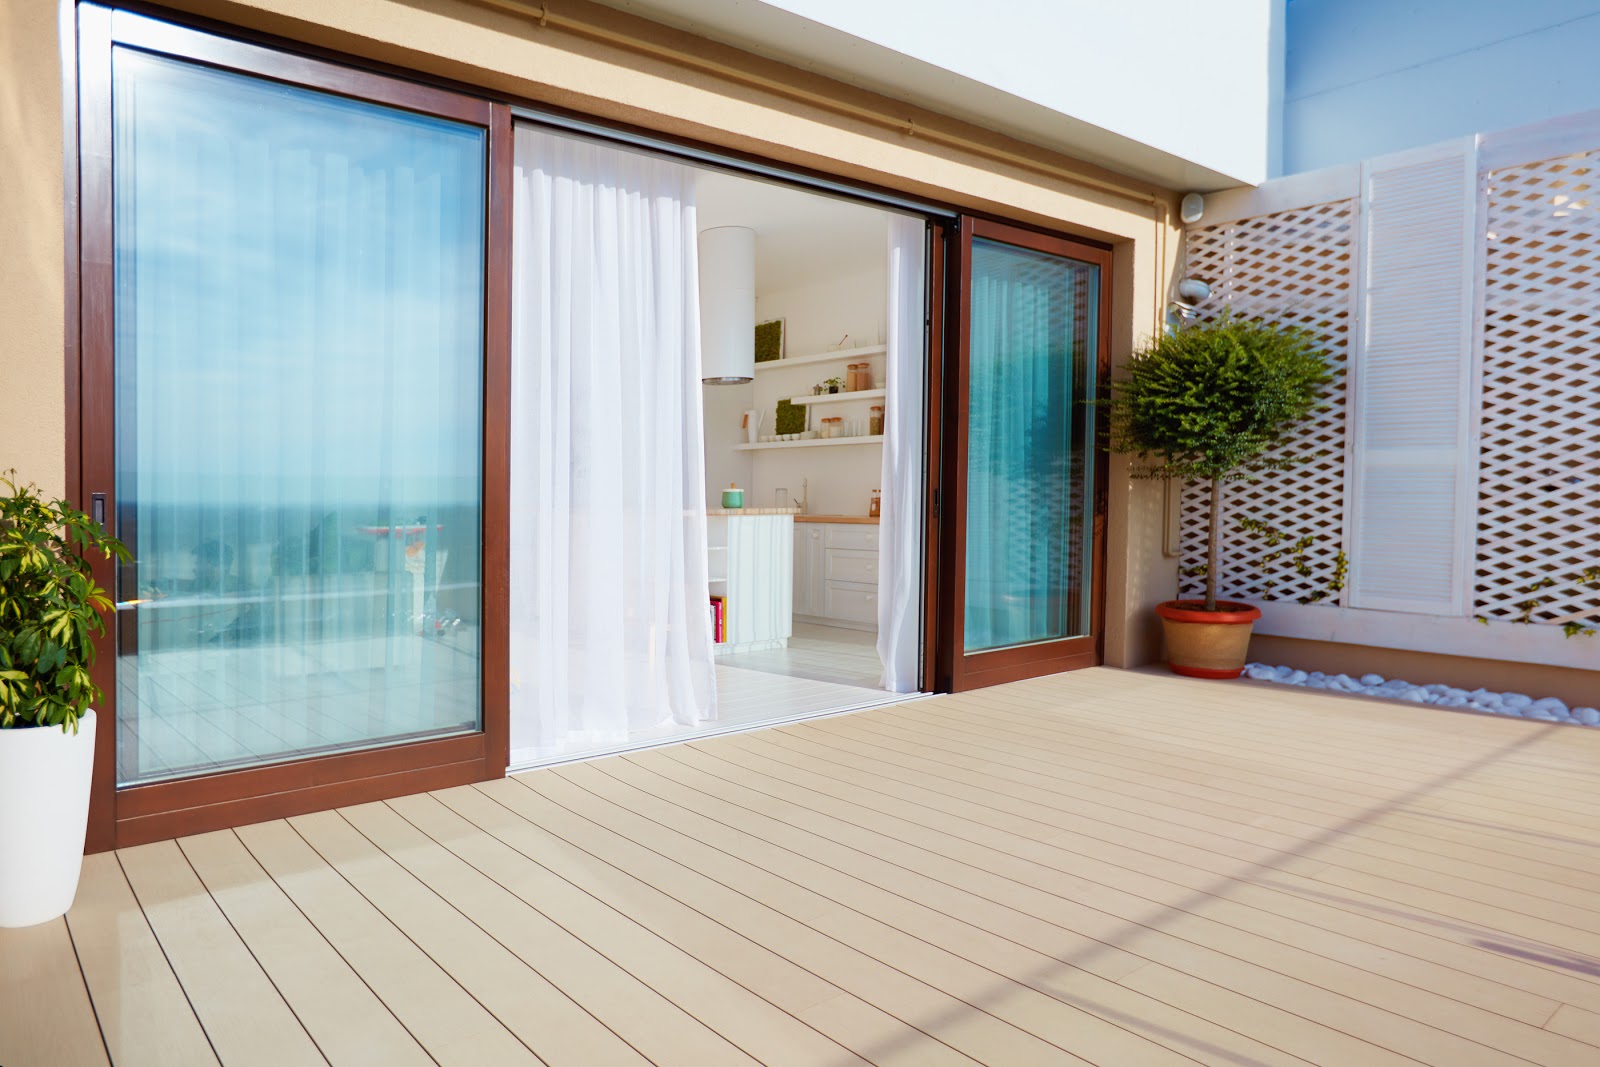 Reduce Your Utility Bill by Installing New Patio Doors